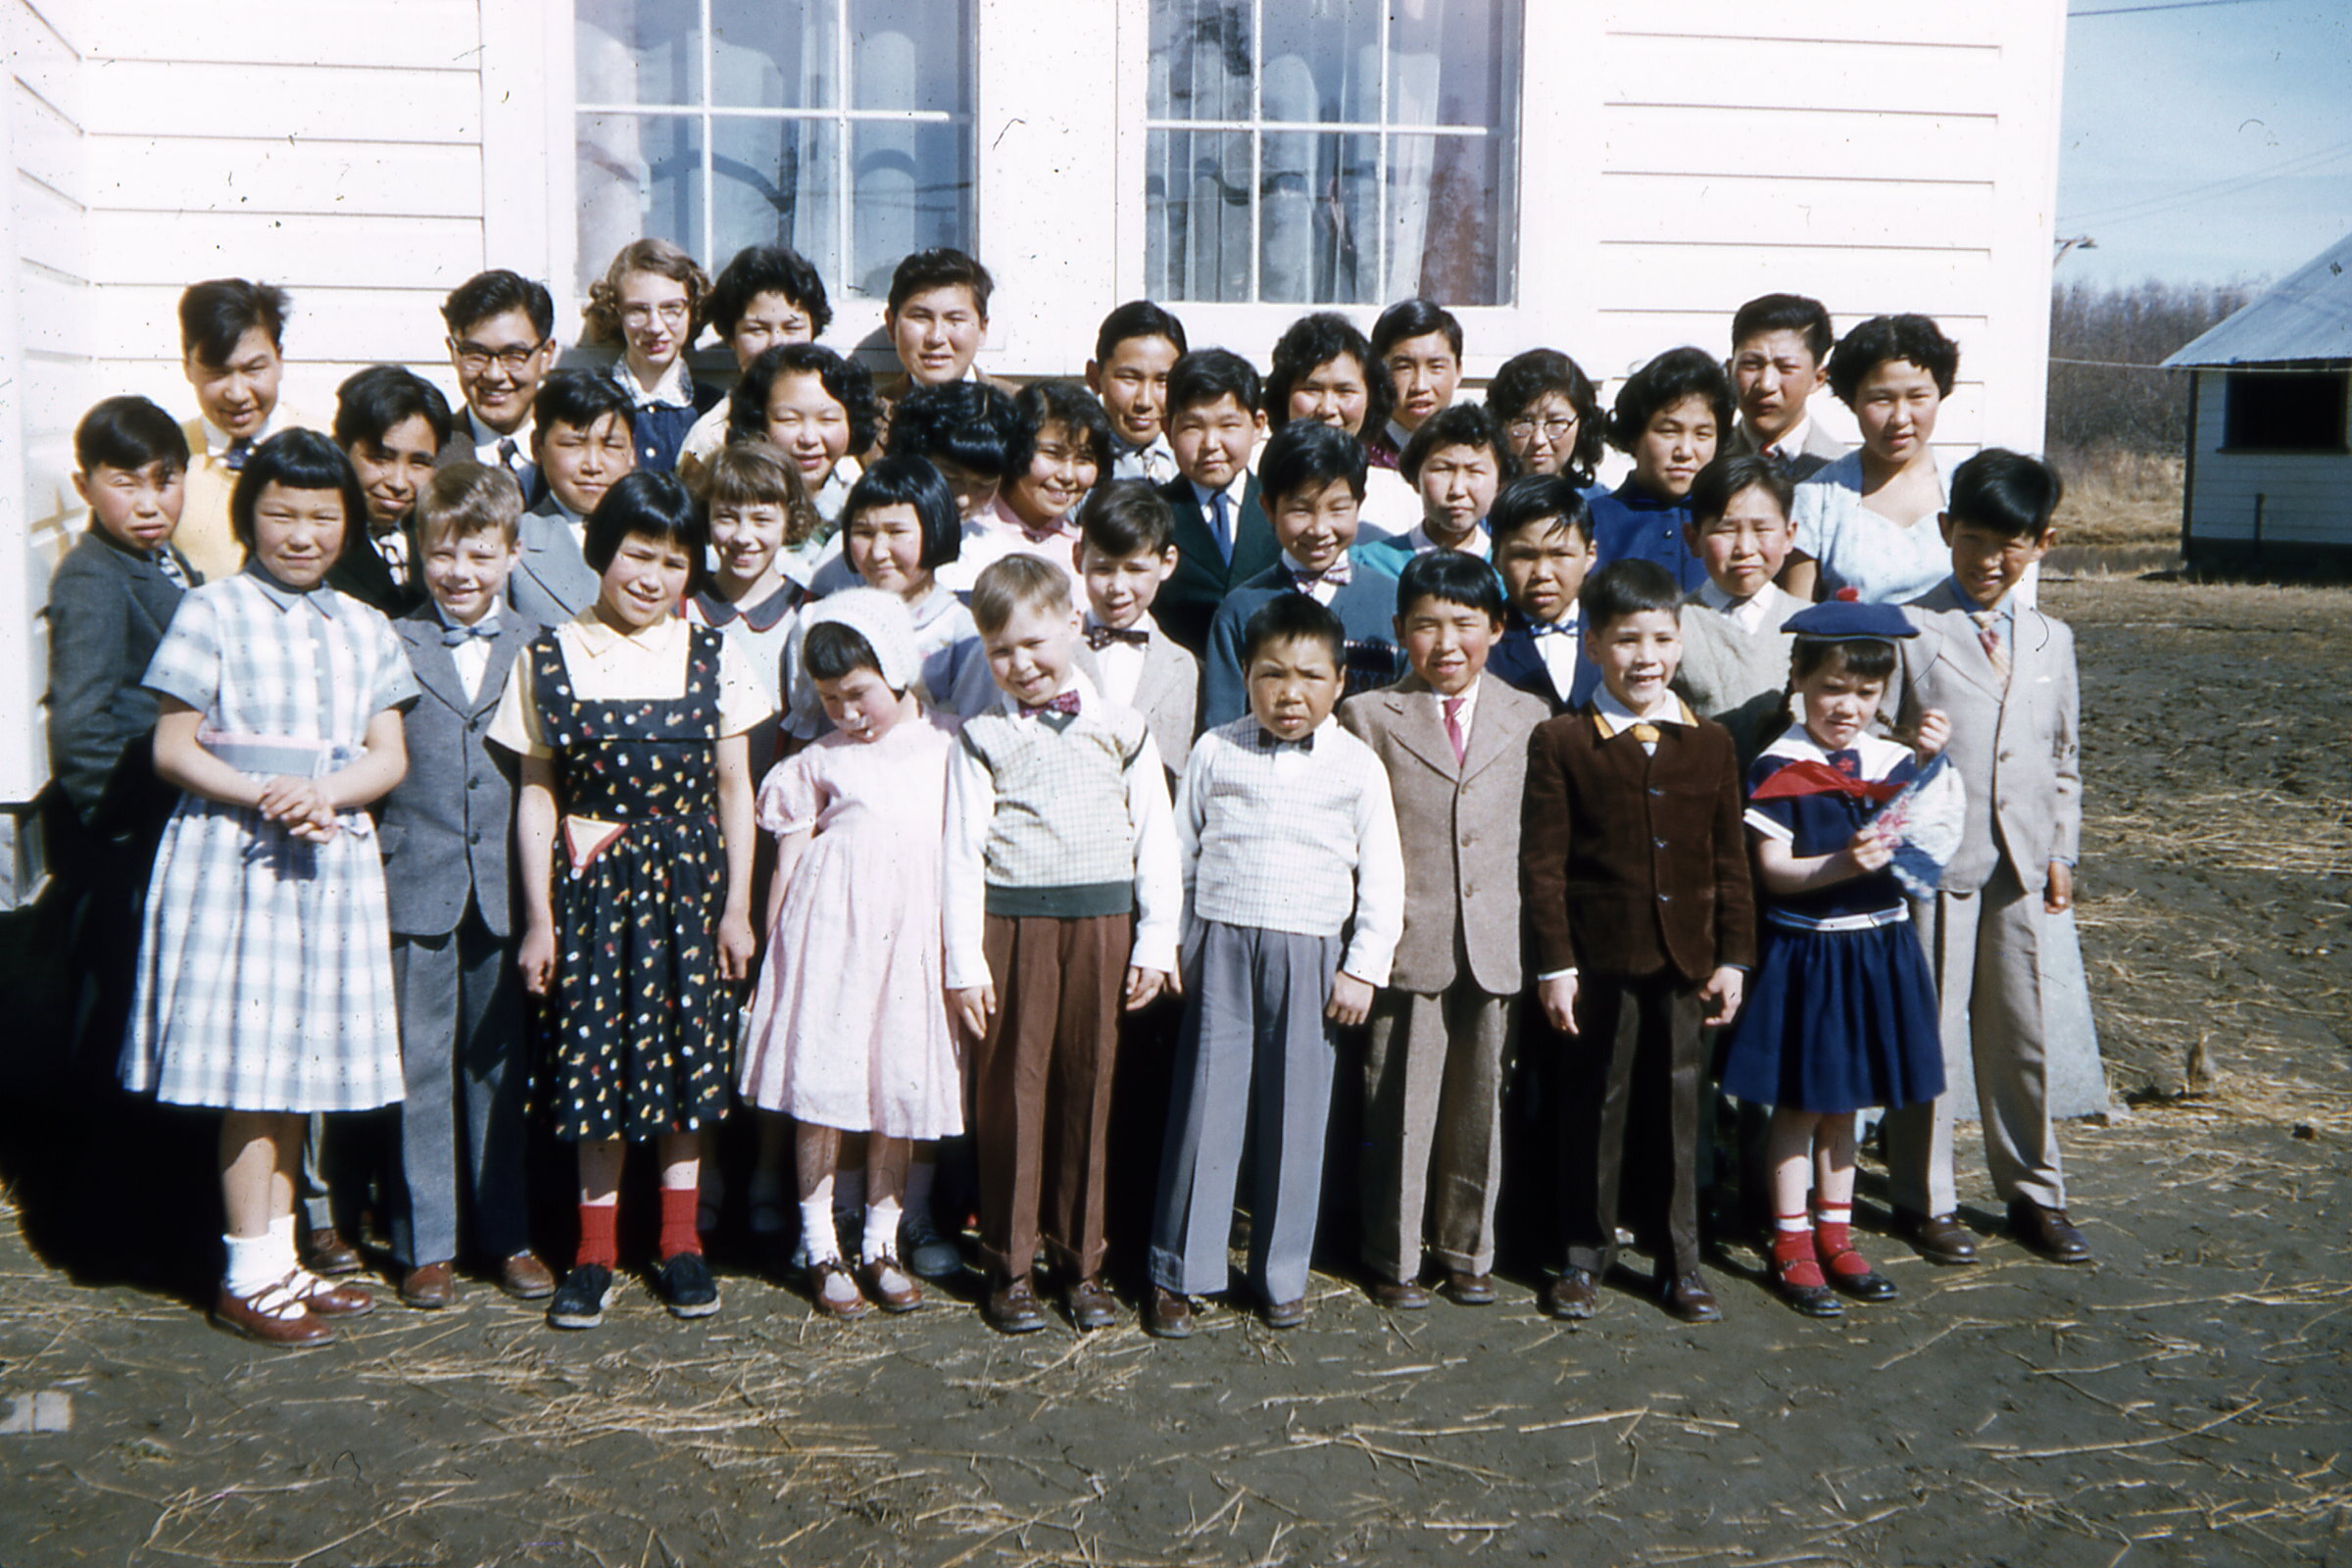  1957 MCH family at Easter. Photo on loan from the Henkelman Archives. 